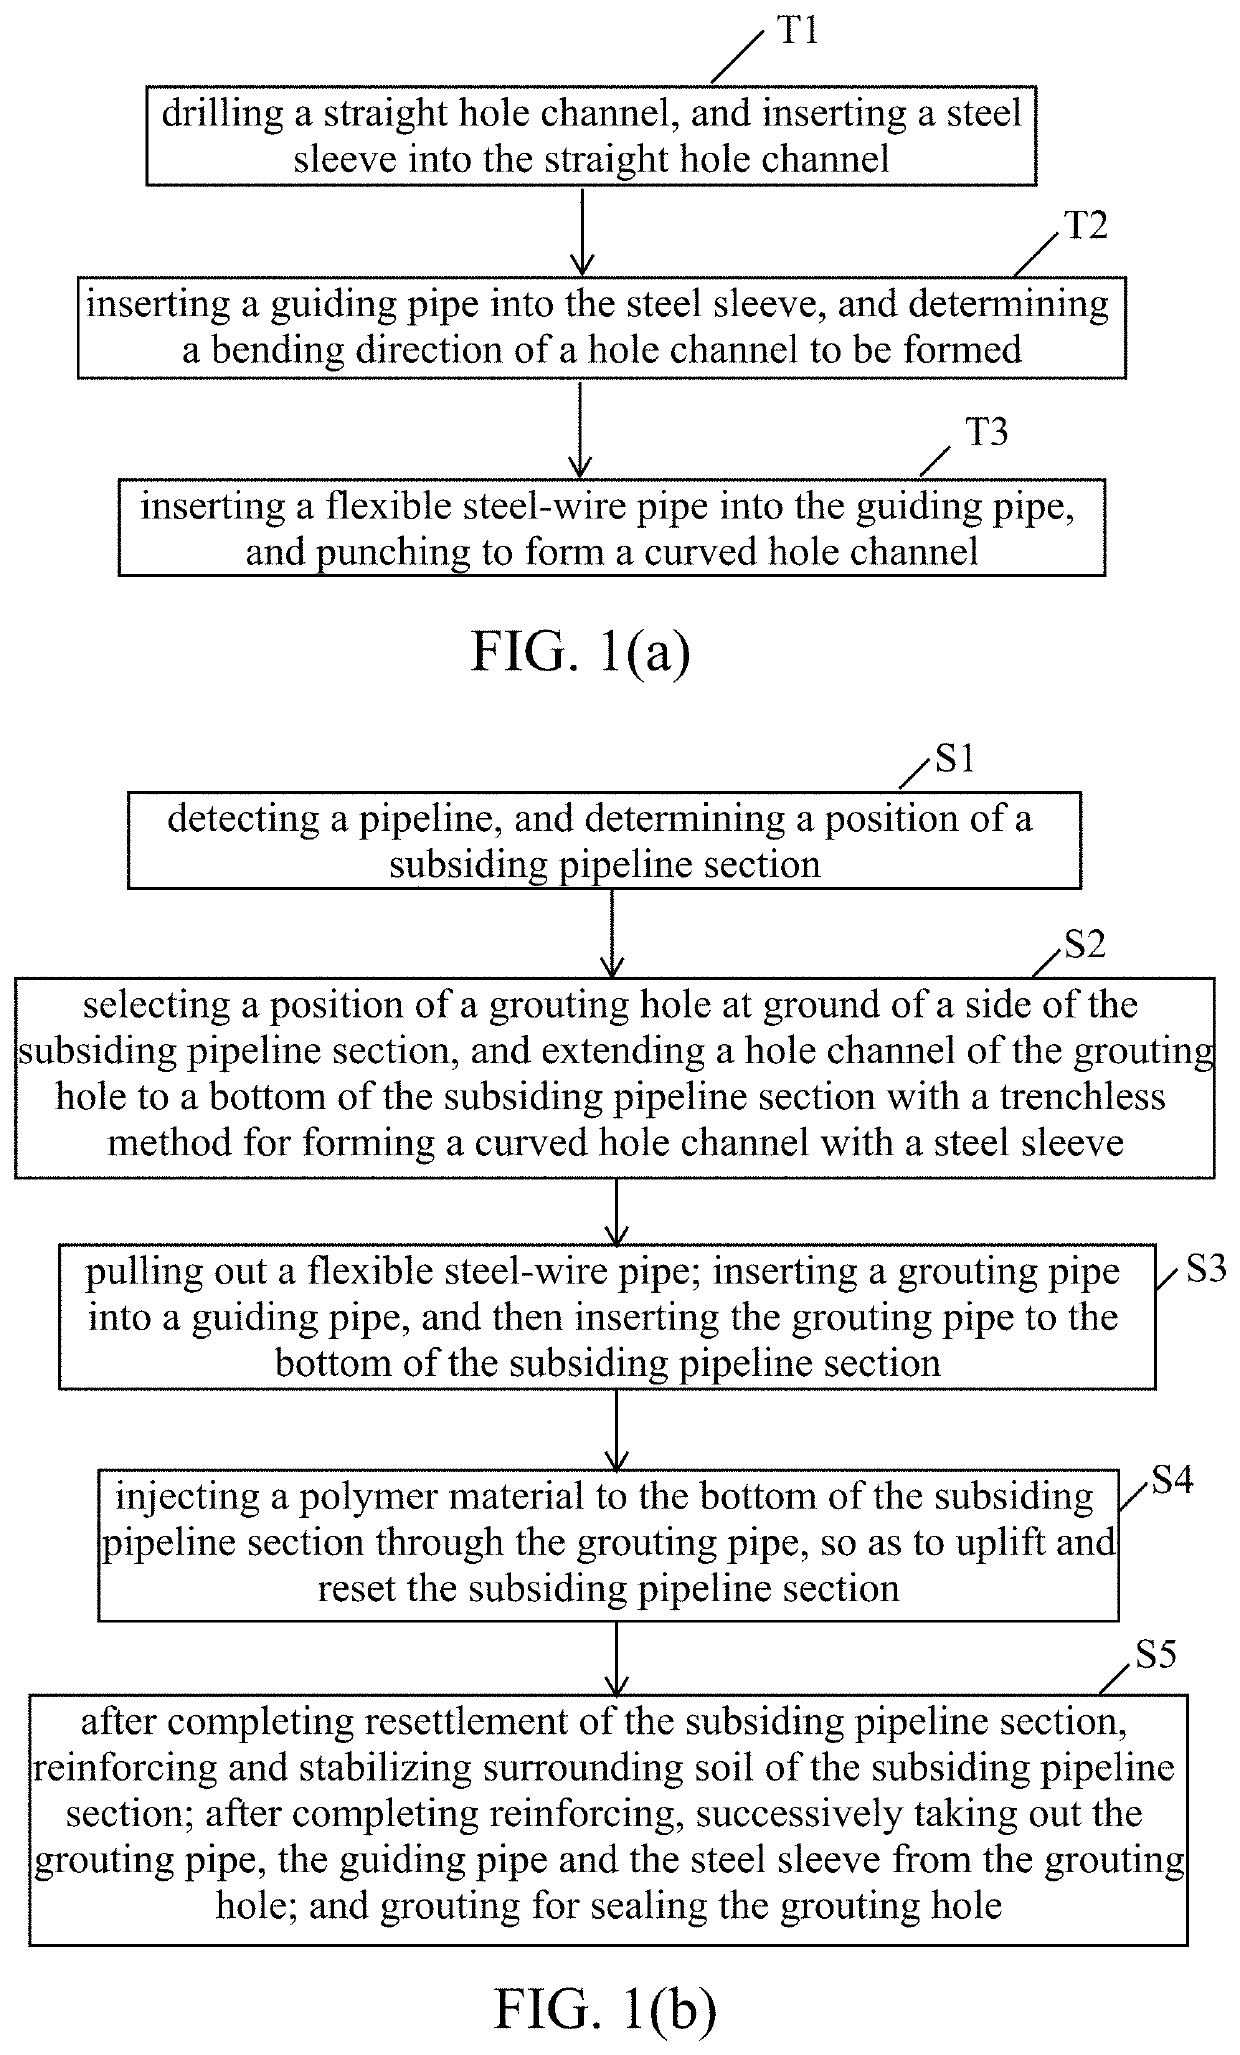 Trenchless methods for forming curved hole channel with steel sleeve and pipeline lifting